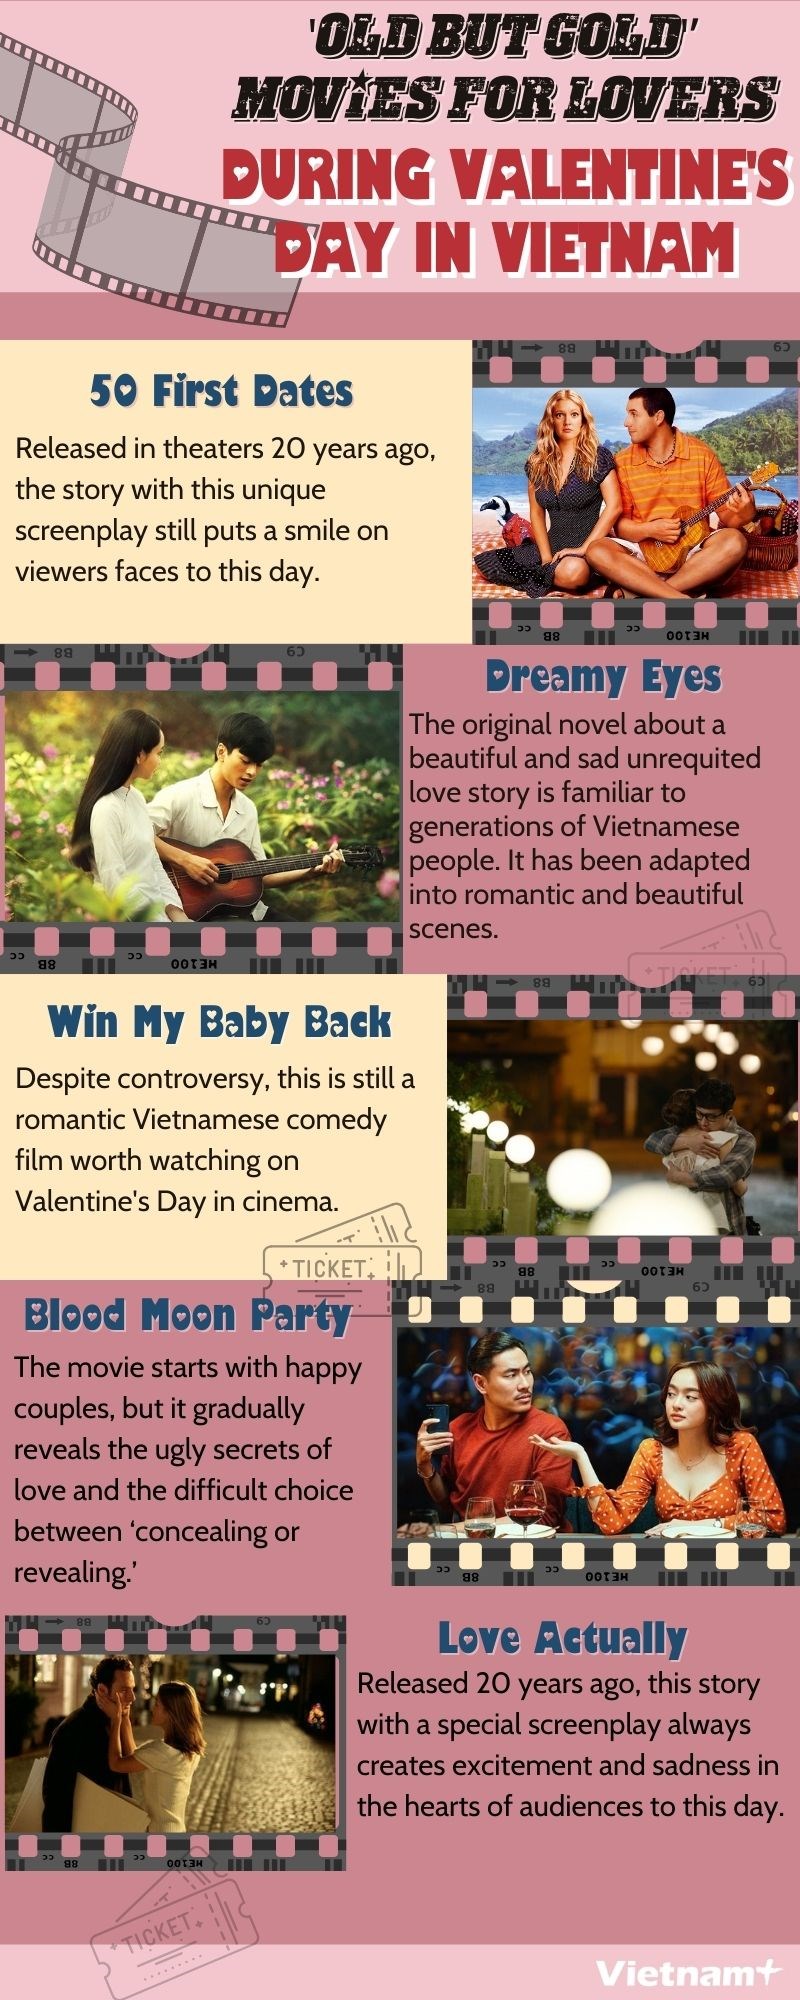 'Old but gold' movies for lovers during Valentine's Day in Vietnam hinh anh 1